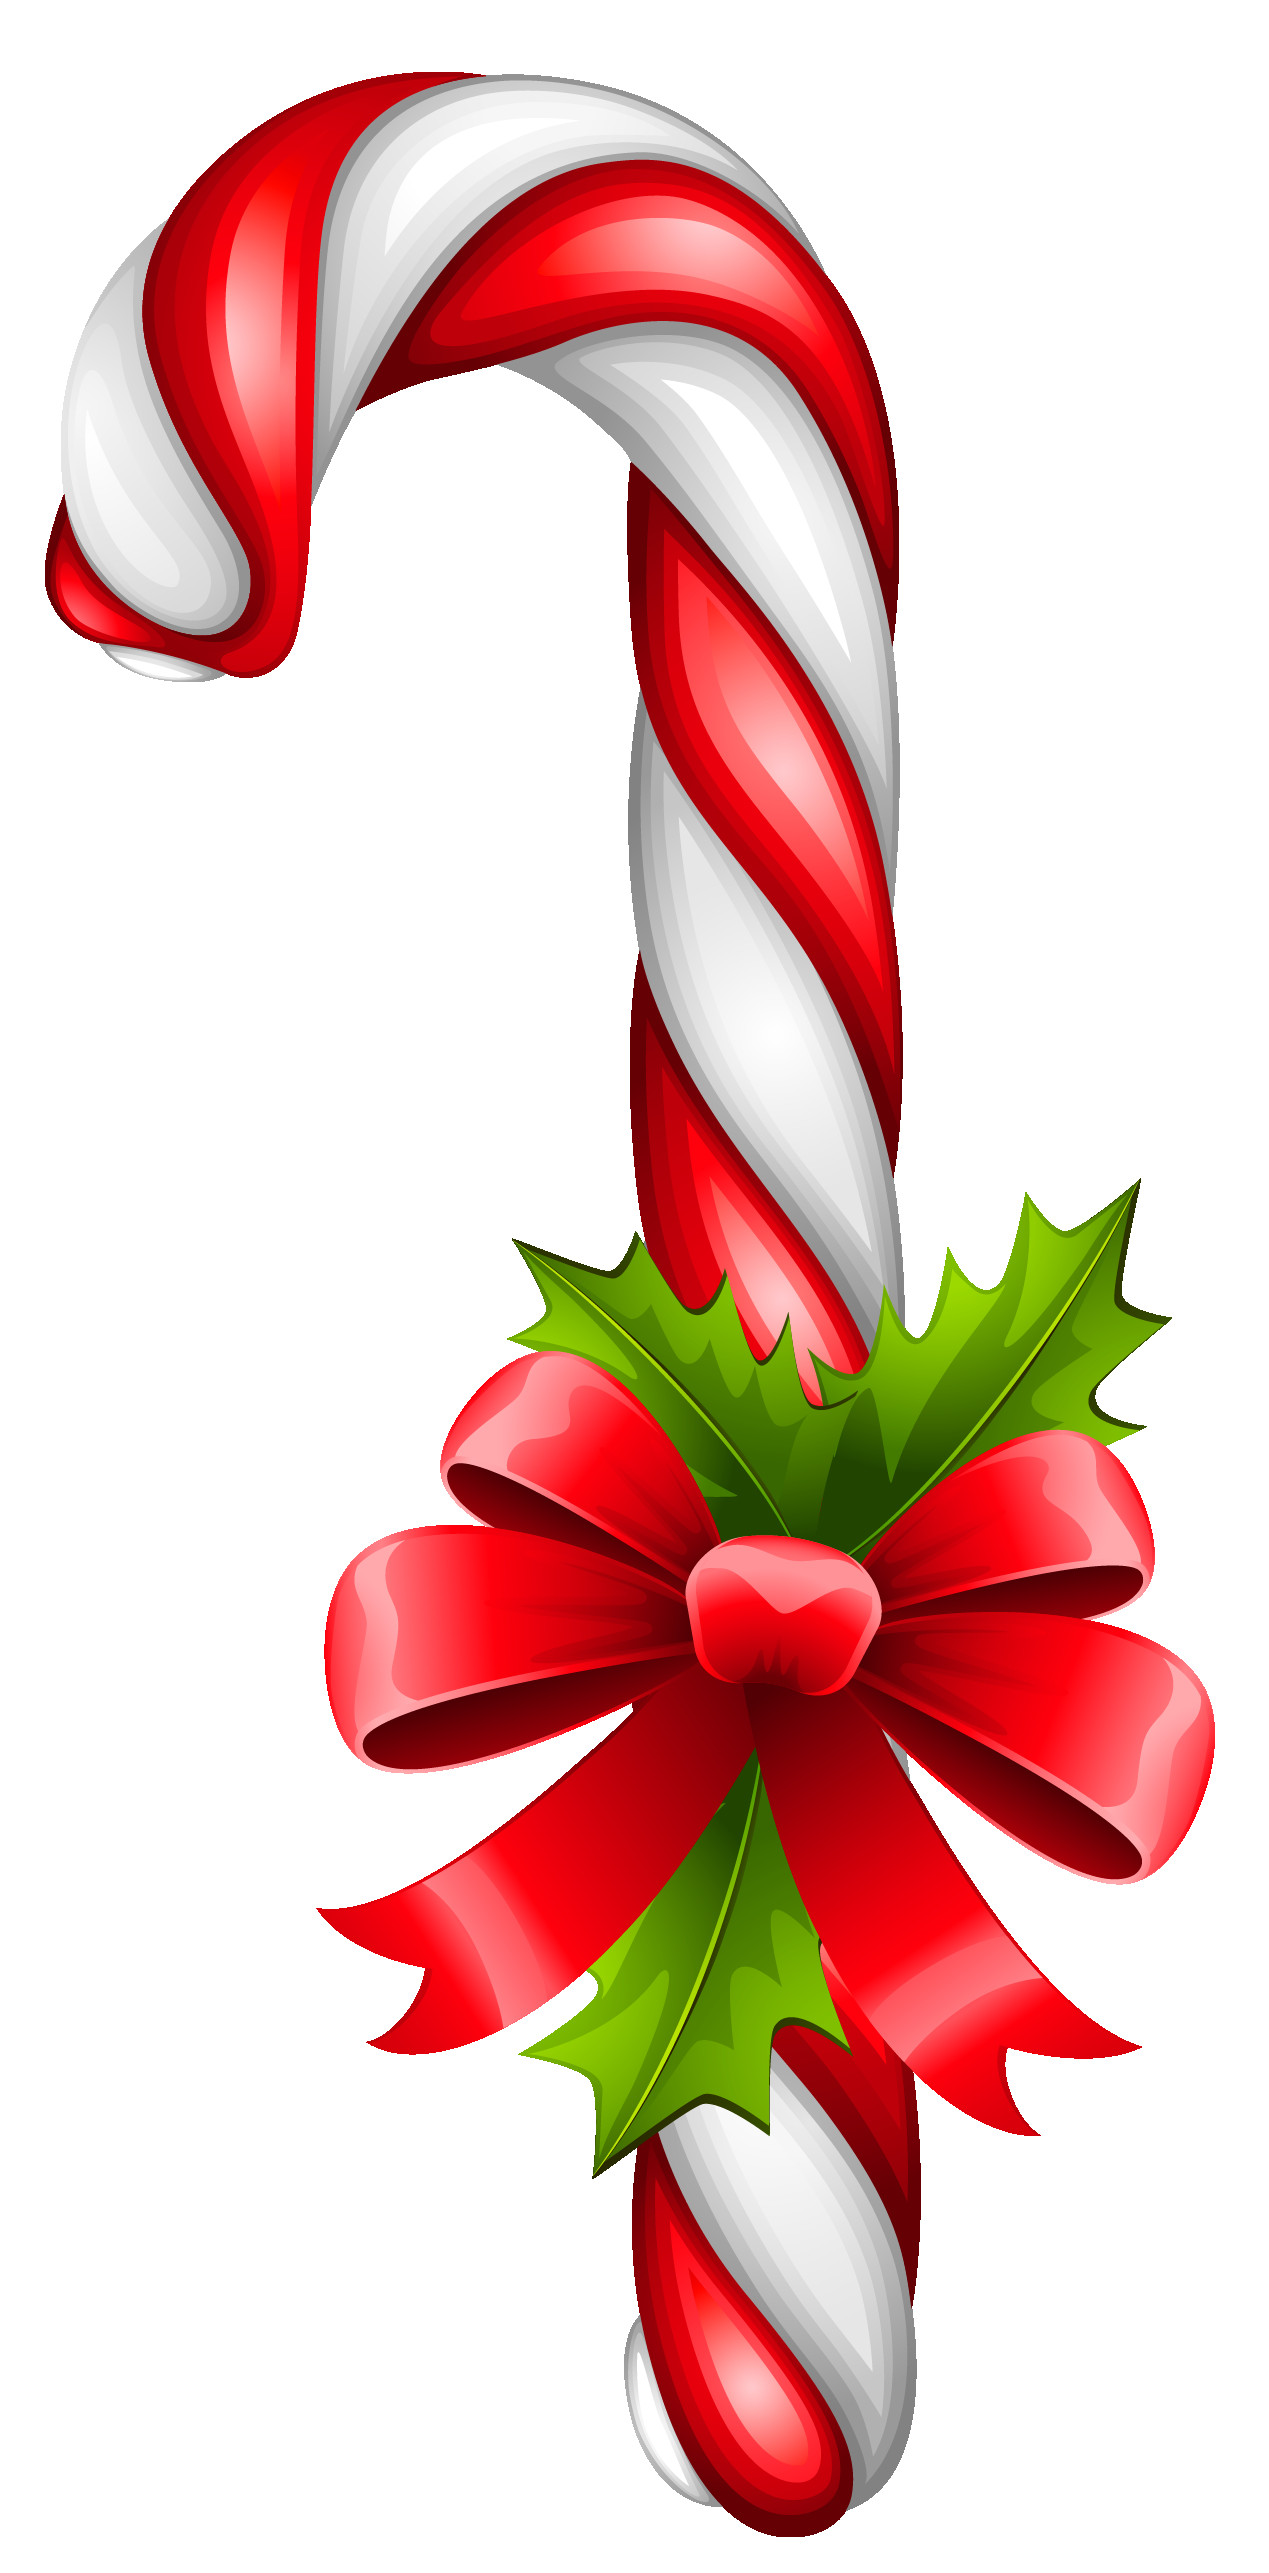 Christmas Candy Cane Images
 Candy cane christmas clip art free clip art images free